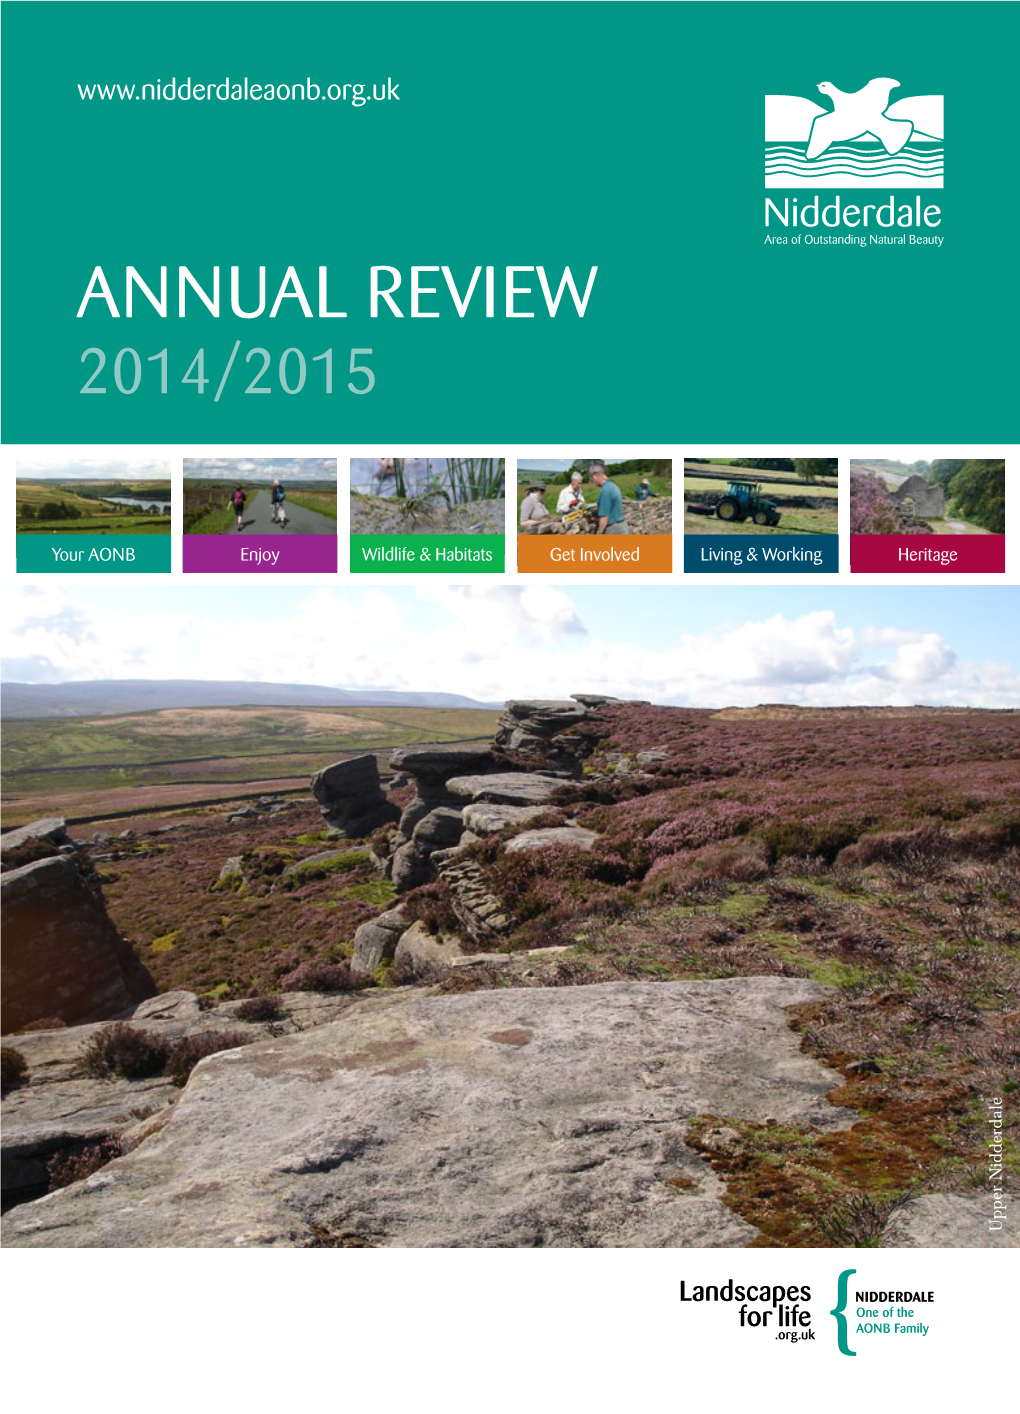 Annual Review 2014/2015